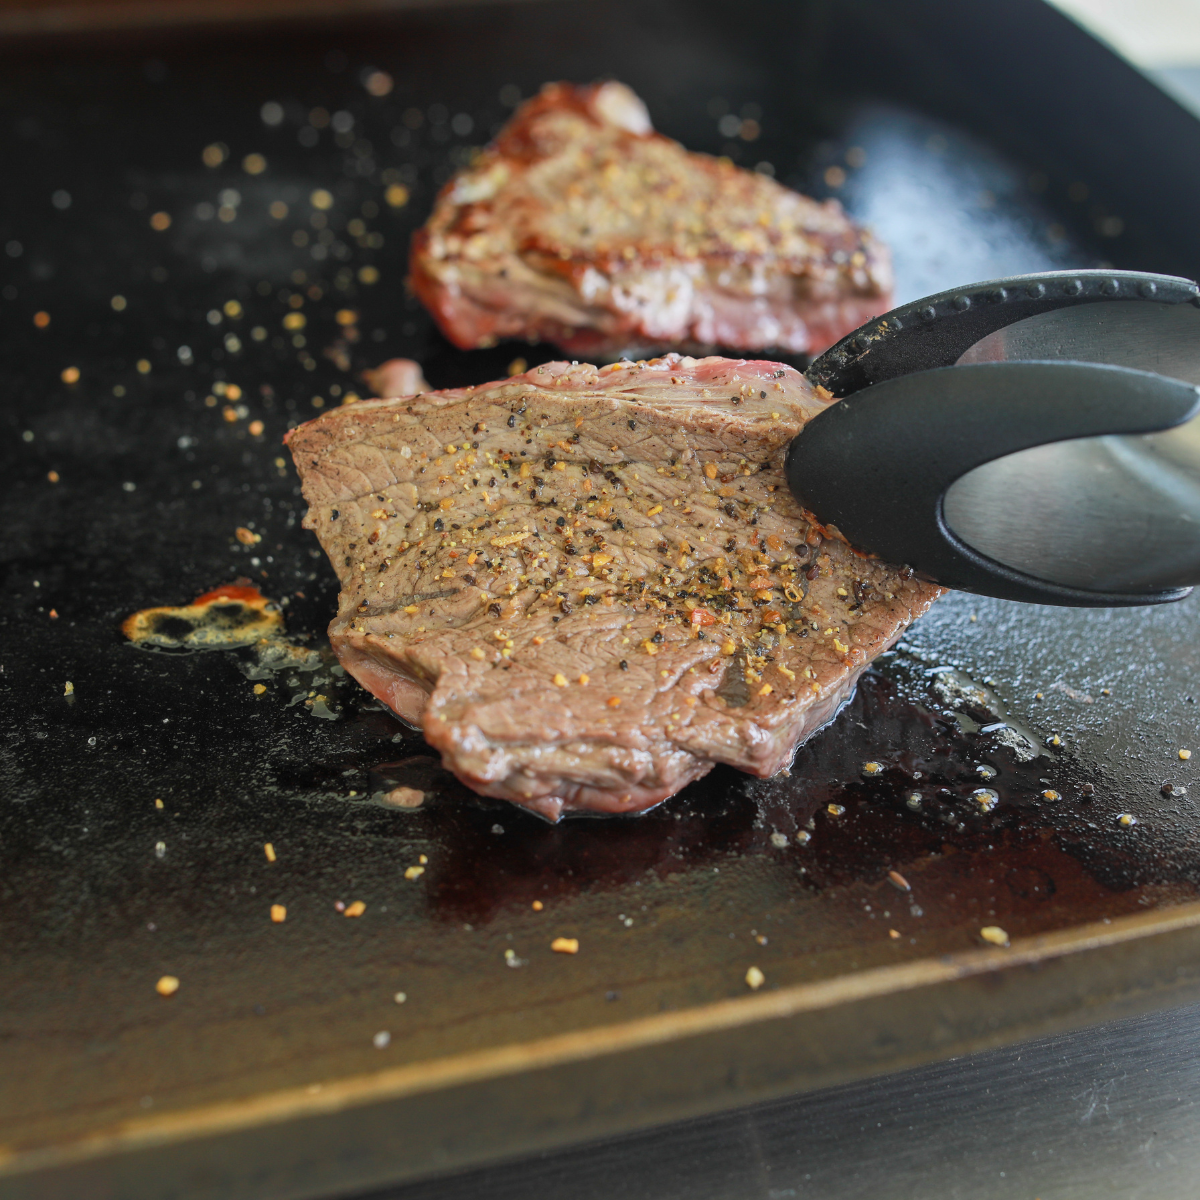 How To Cook Sirloin Steak On Blackstone Griddle